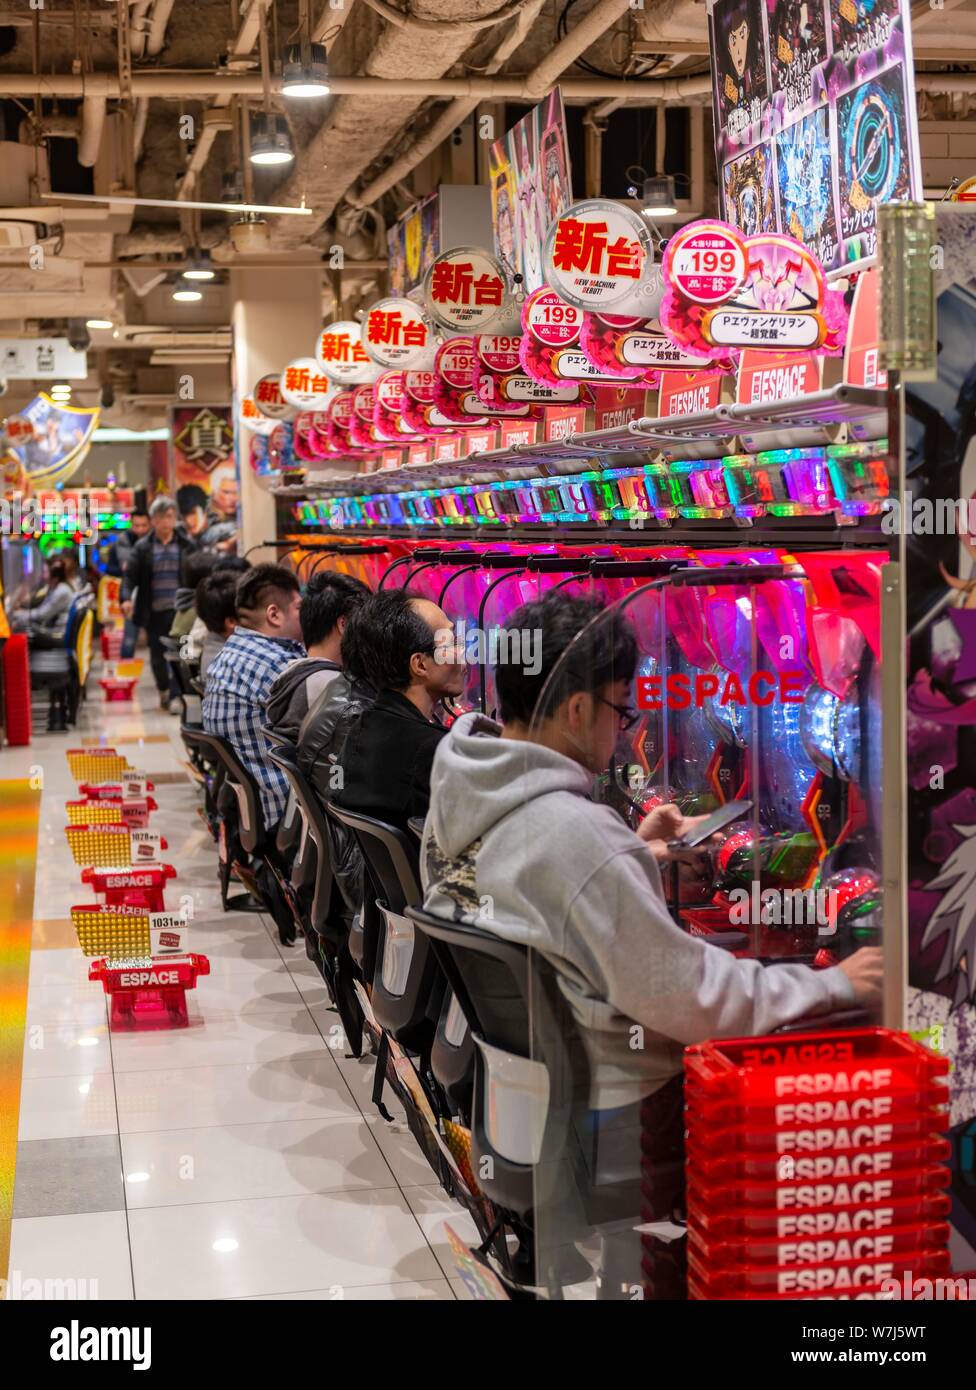 Players Sit At Slot Machines In A Casino Tokyo Japan Stock Photo Alamy